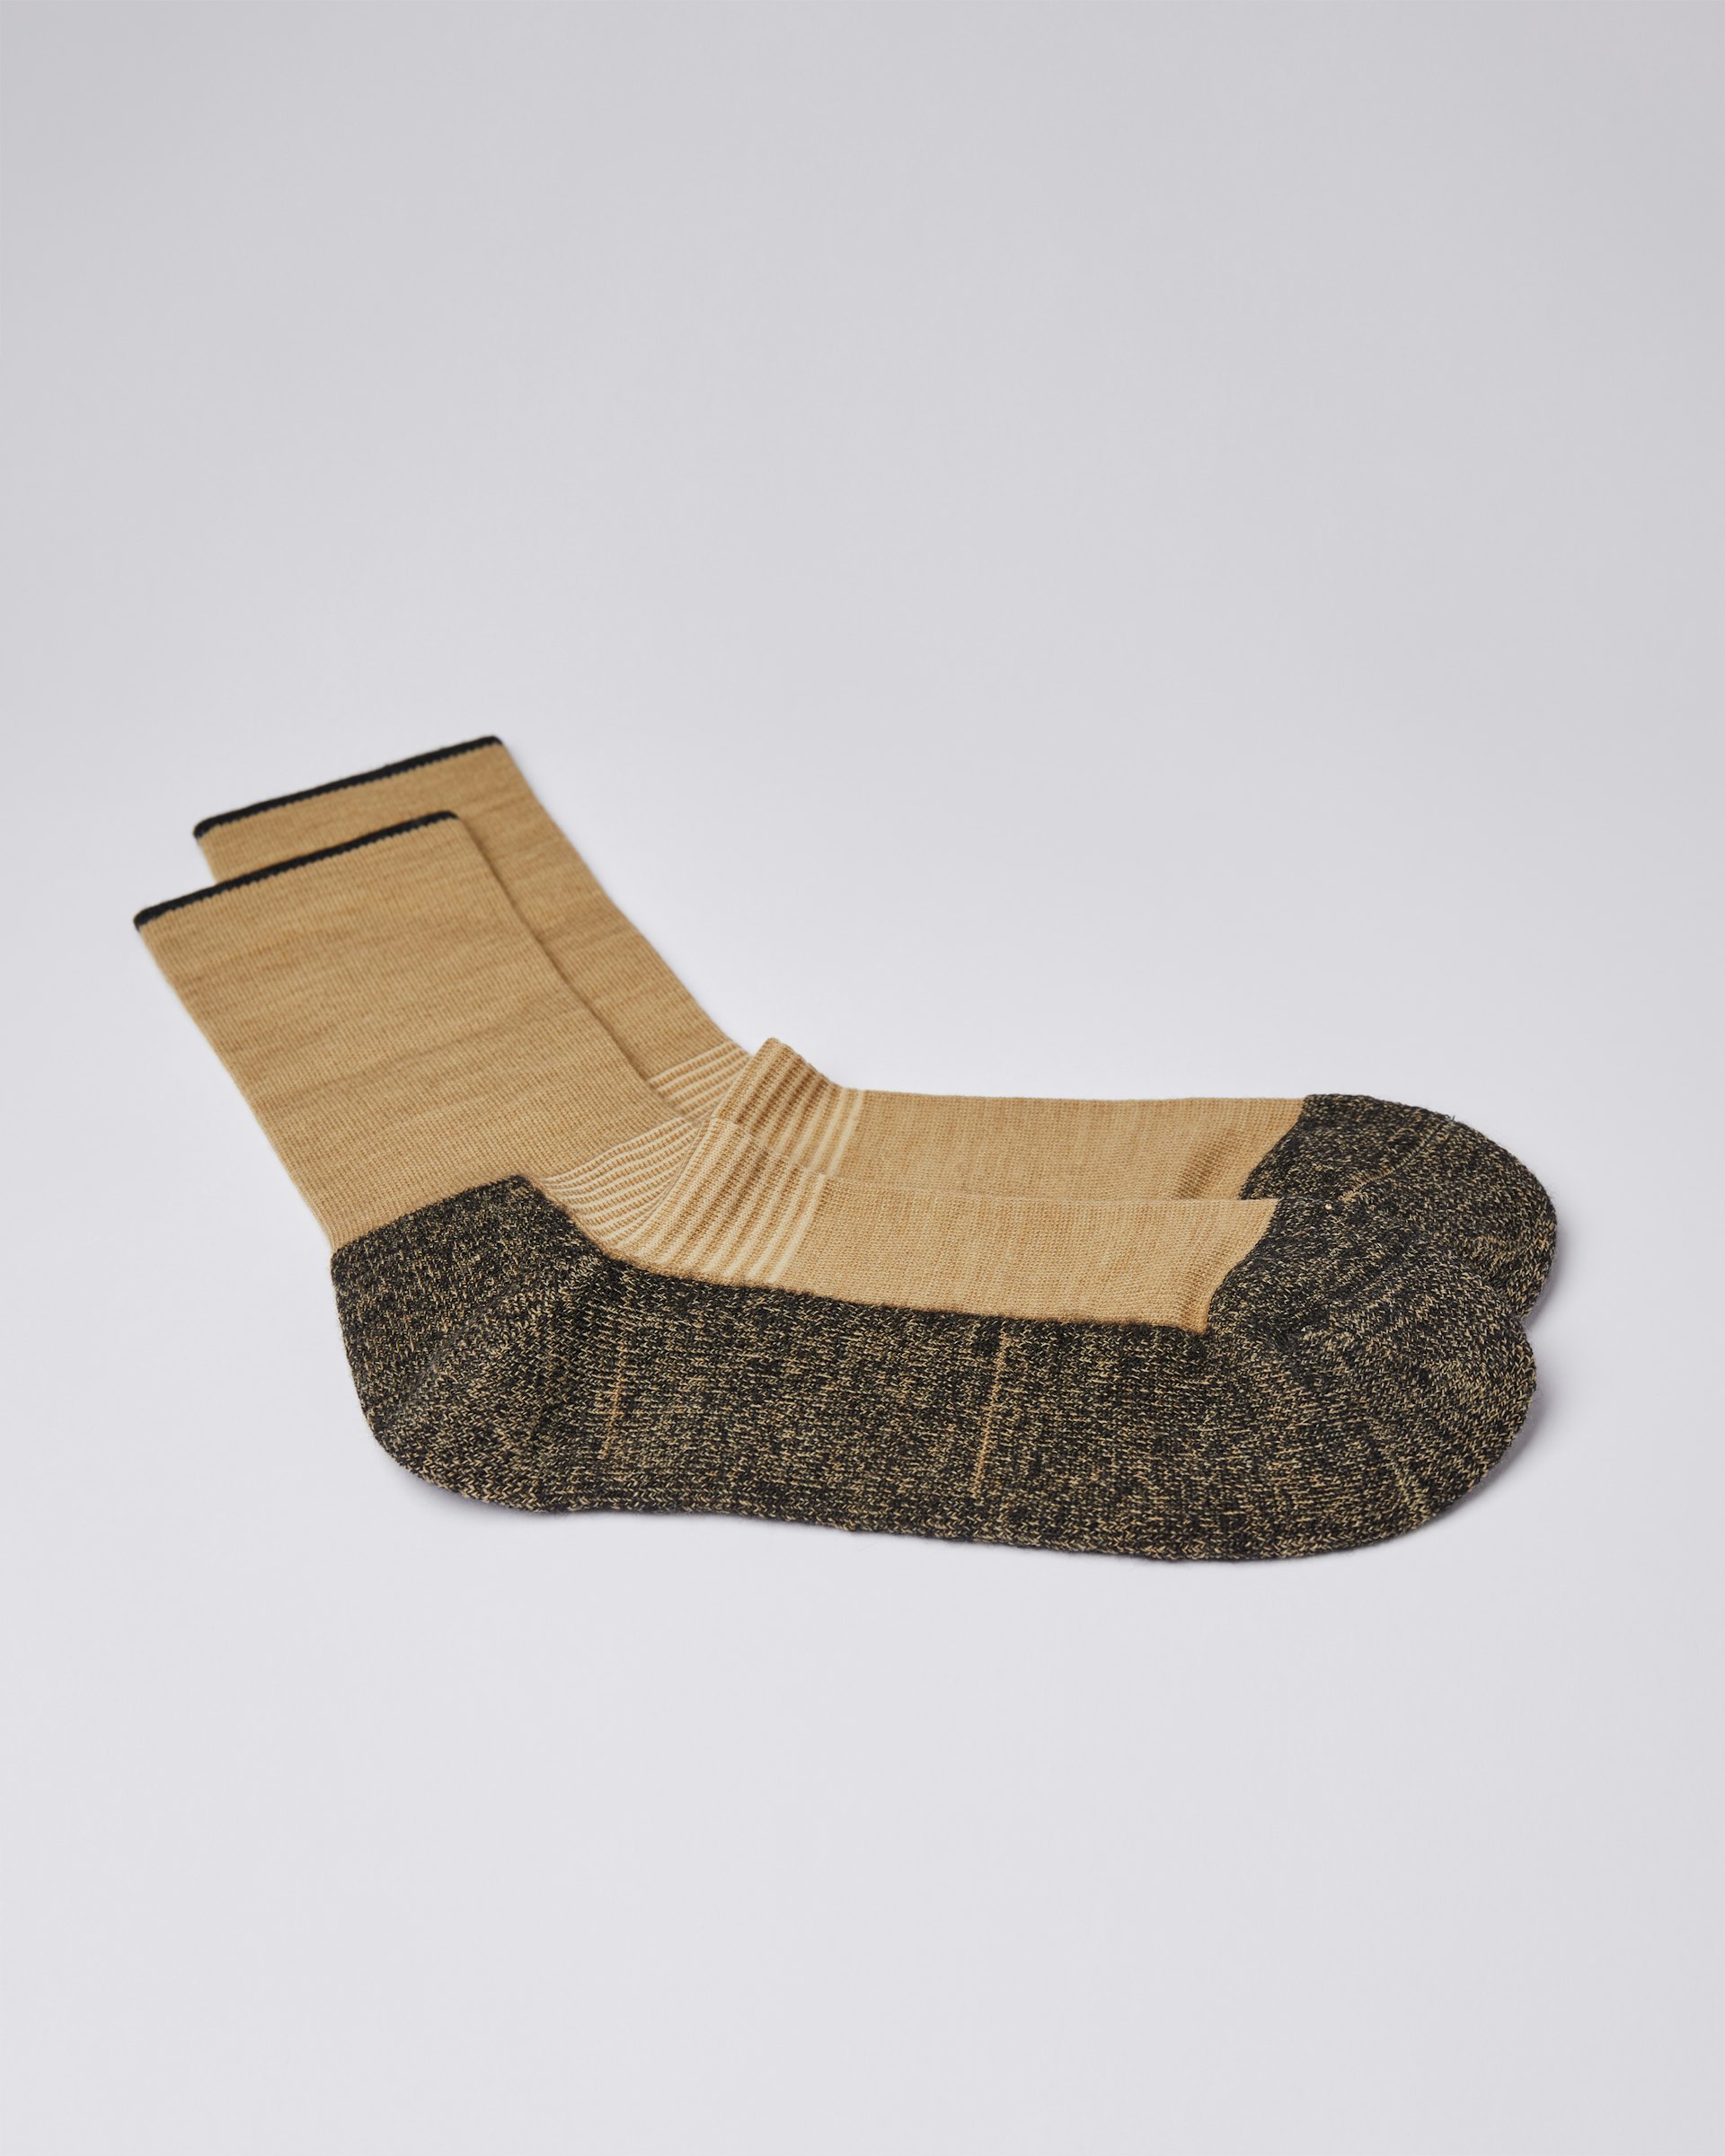 Wool sock belongs to the category Items and is in color black & bronze (3 of 3)